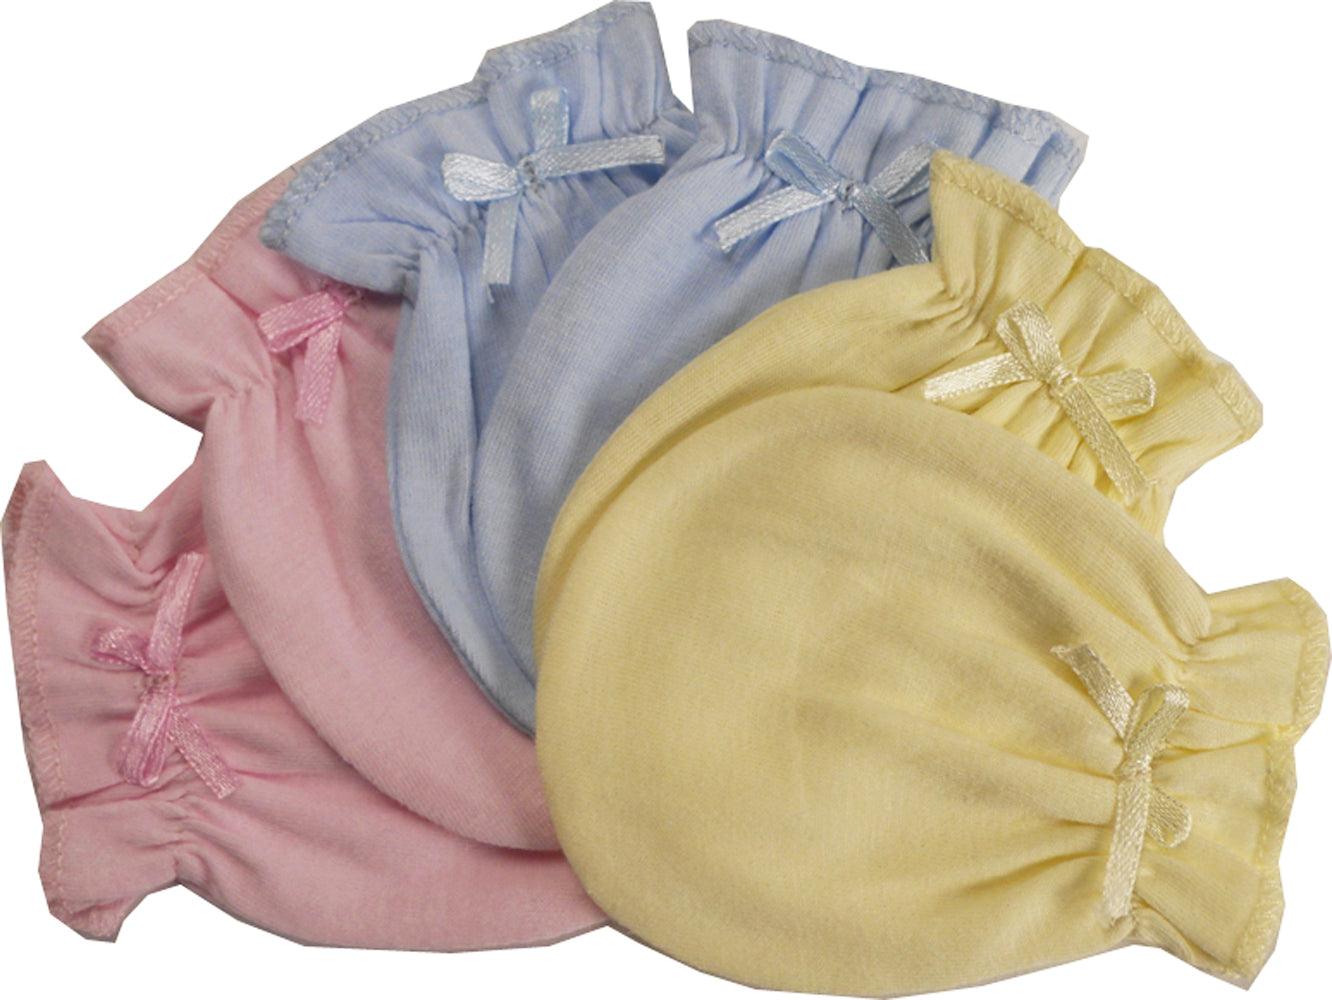 Blue Infant Mittens 116Pack